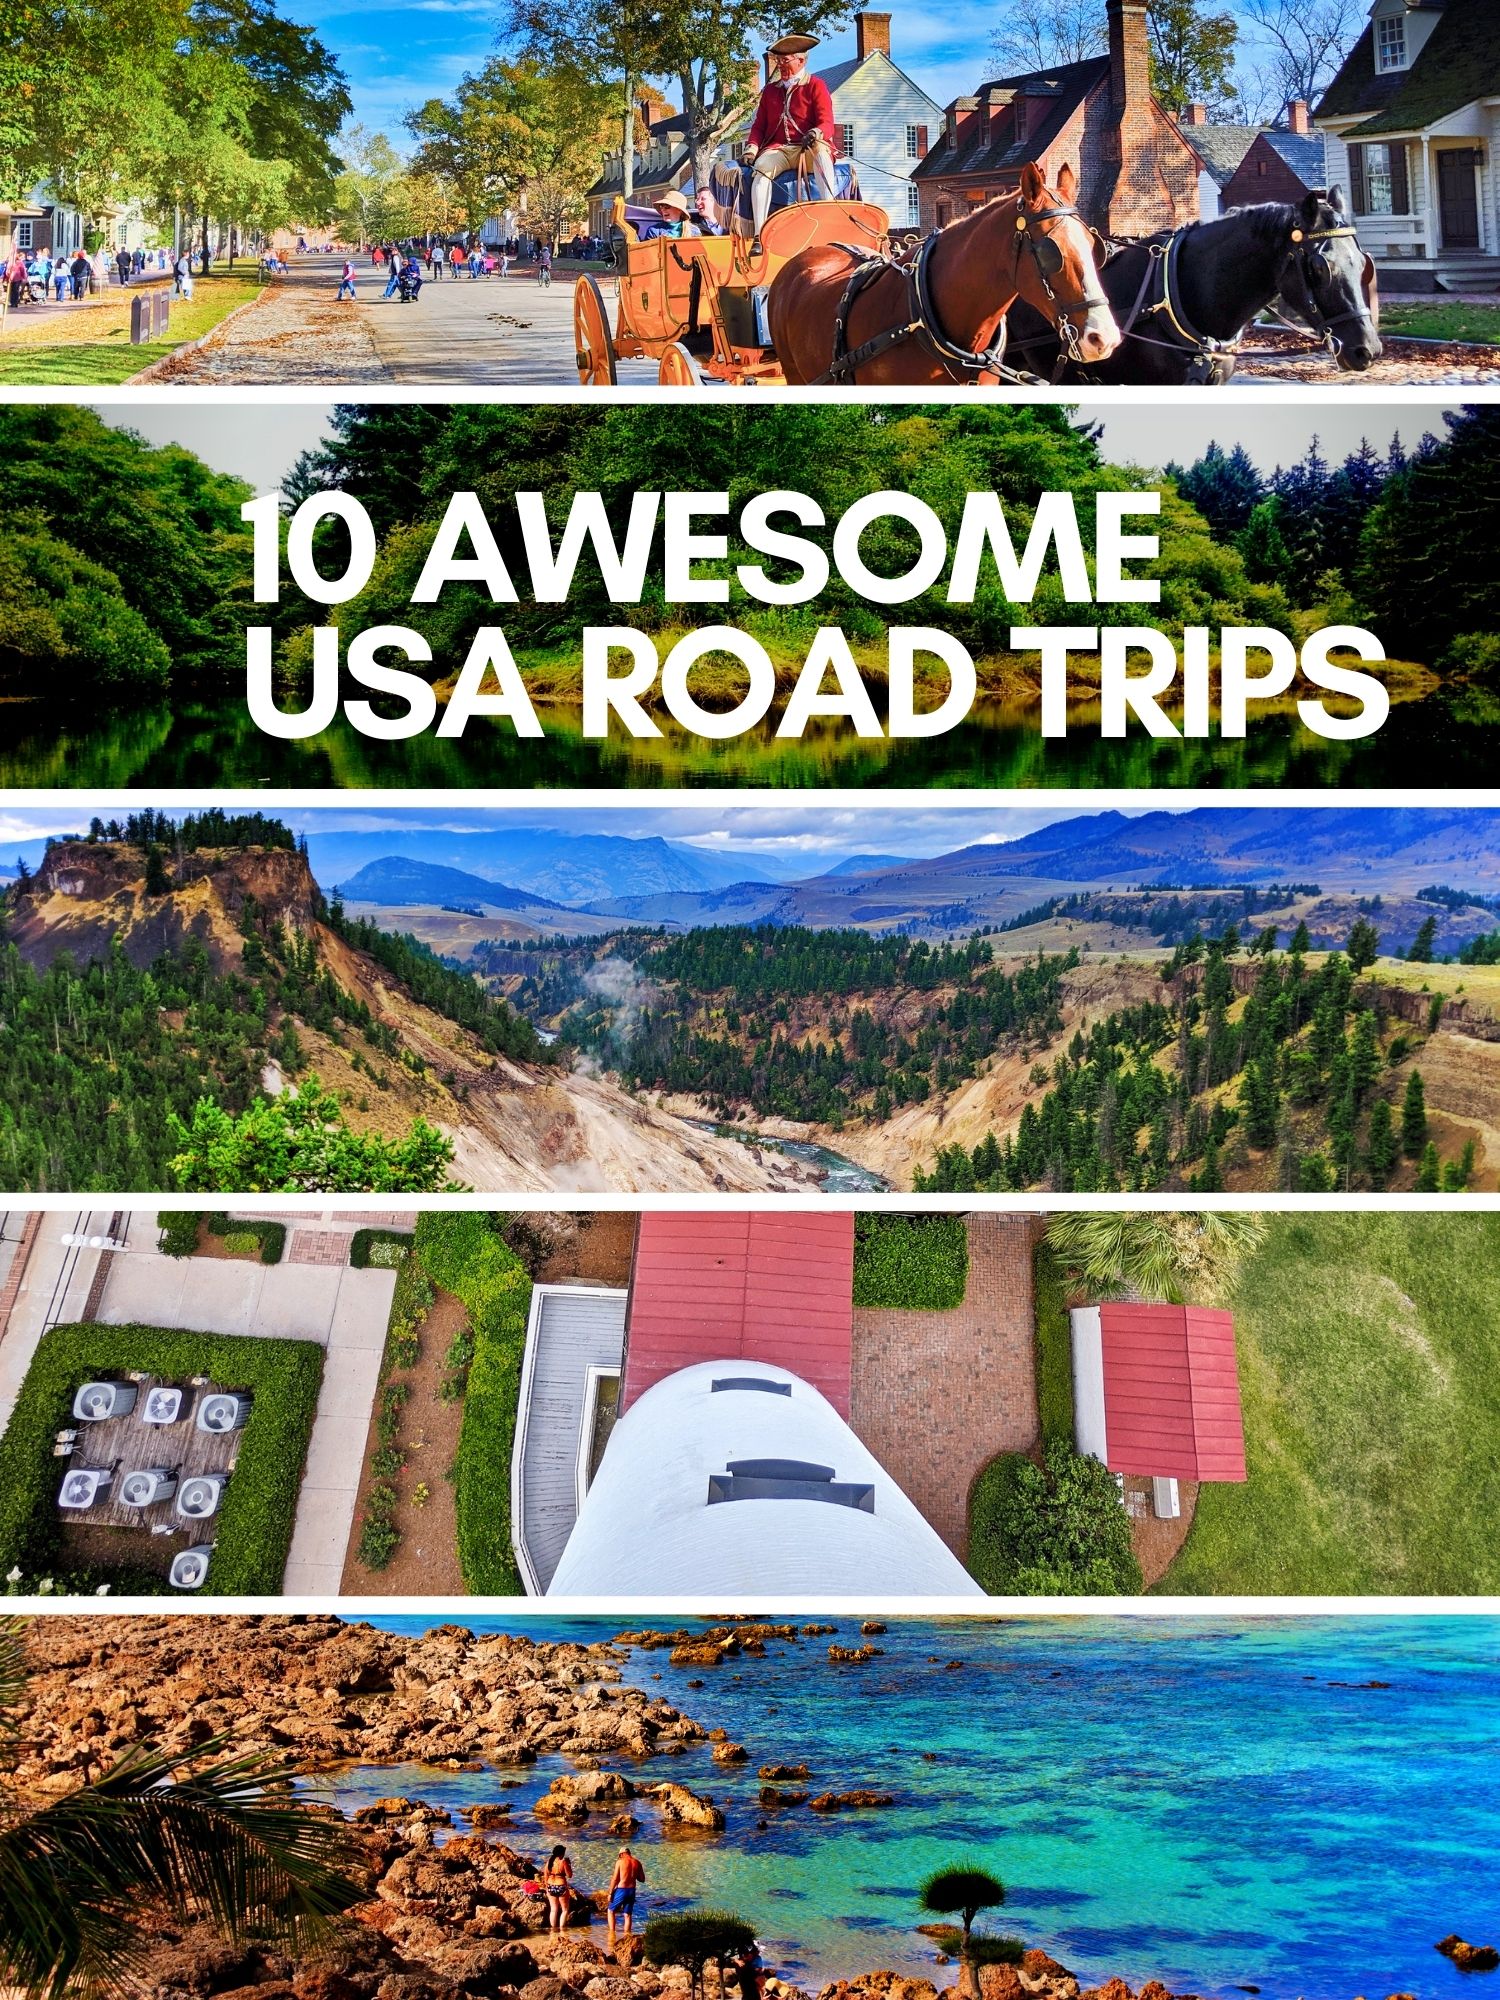 10 awesome USA road trips that you can plan now. From rugged Oregon to the Florida Keys, historic Virginia and Washington DC to western National Parks. Beautiful, fun USA road trips to look forward to